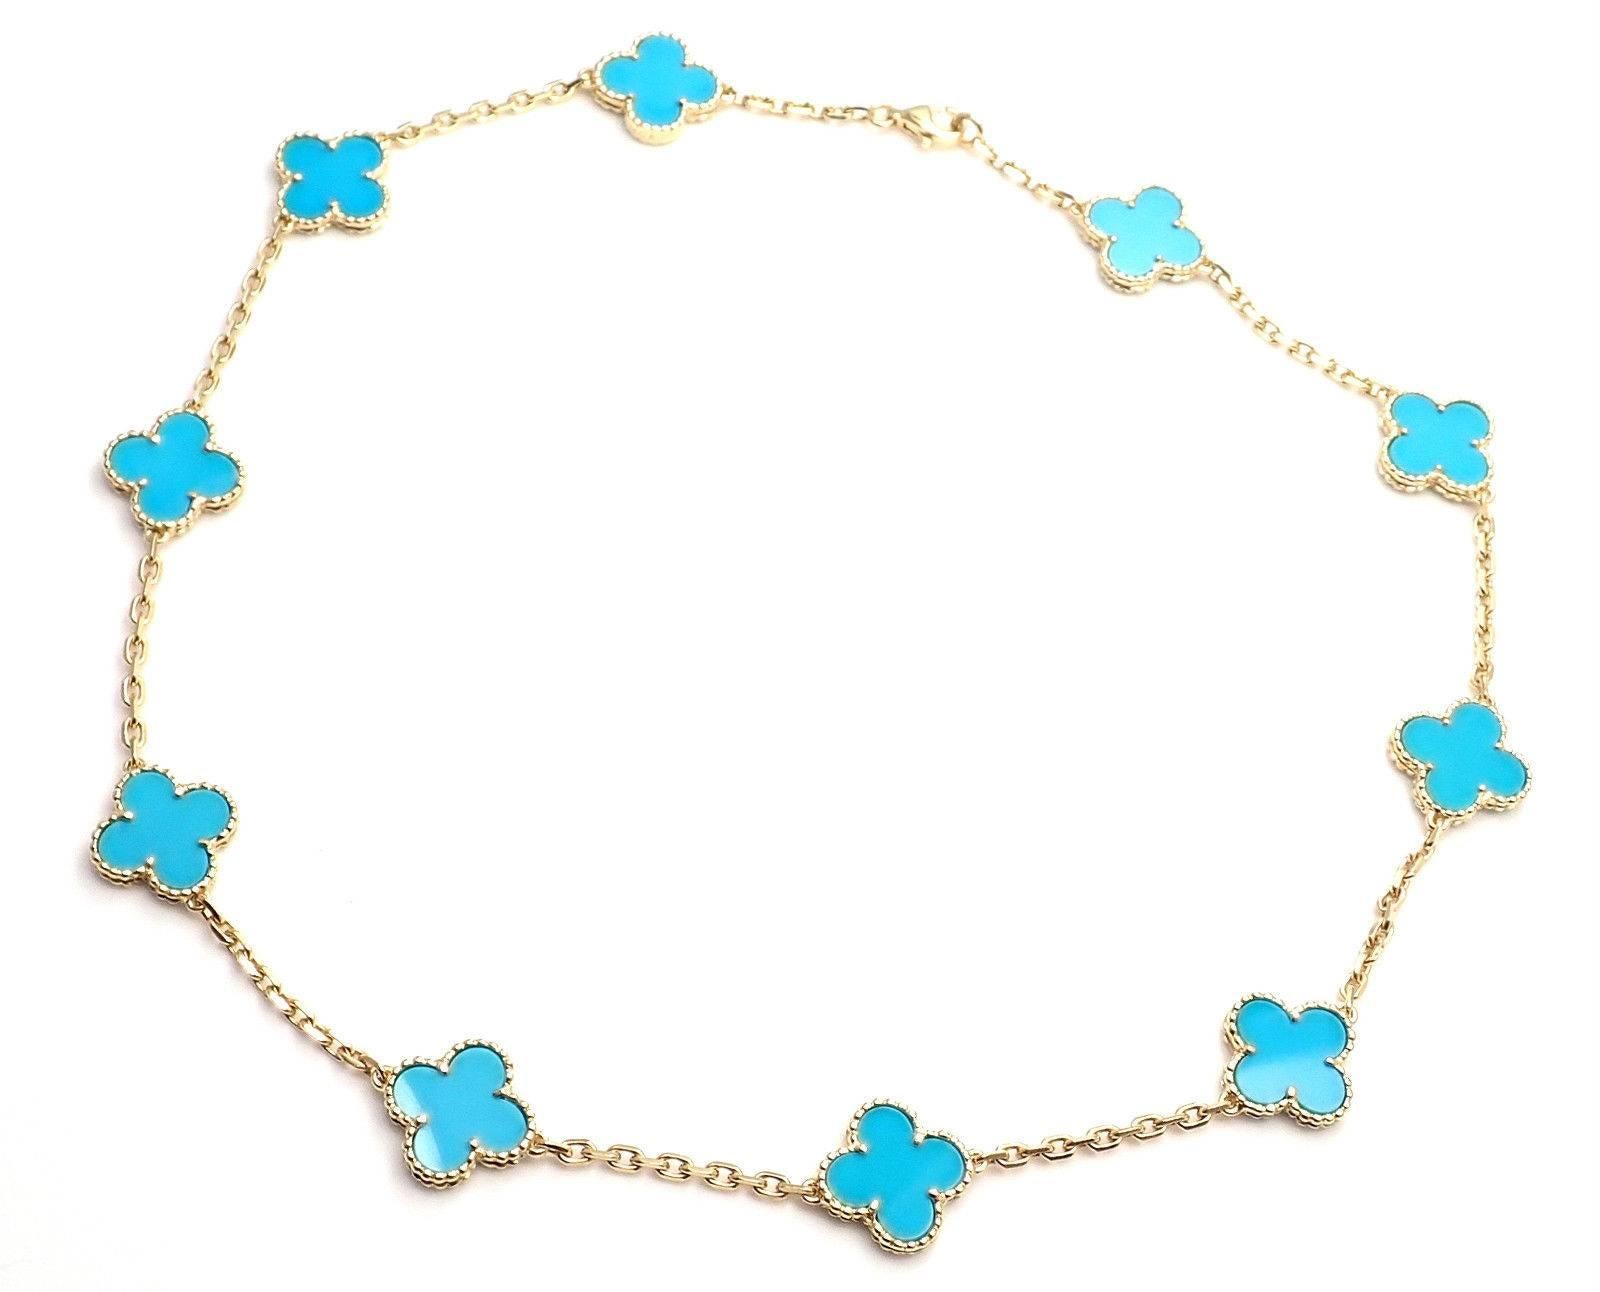 18k Yellow Gold Alhambra 10 Motifs Turquoise Necklace by Van Cleef & Arpels. 
This necklace comes with VCA box.
With 10 motifs of turquoise alhambra stones 15mm each
Details: 
Length: 16.5